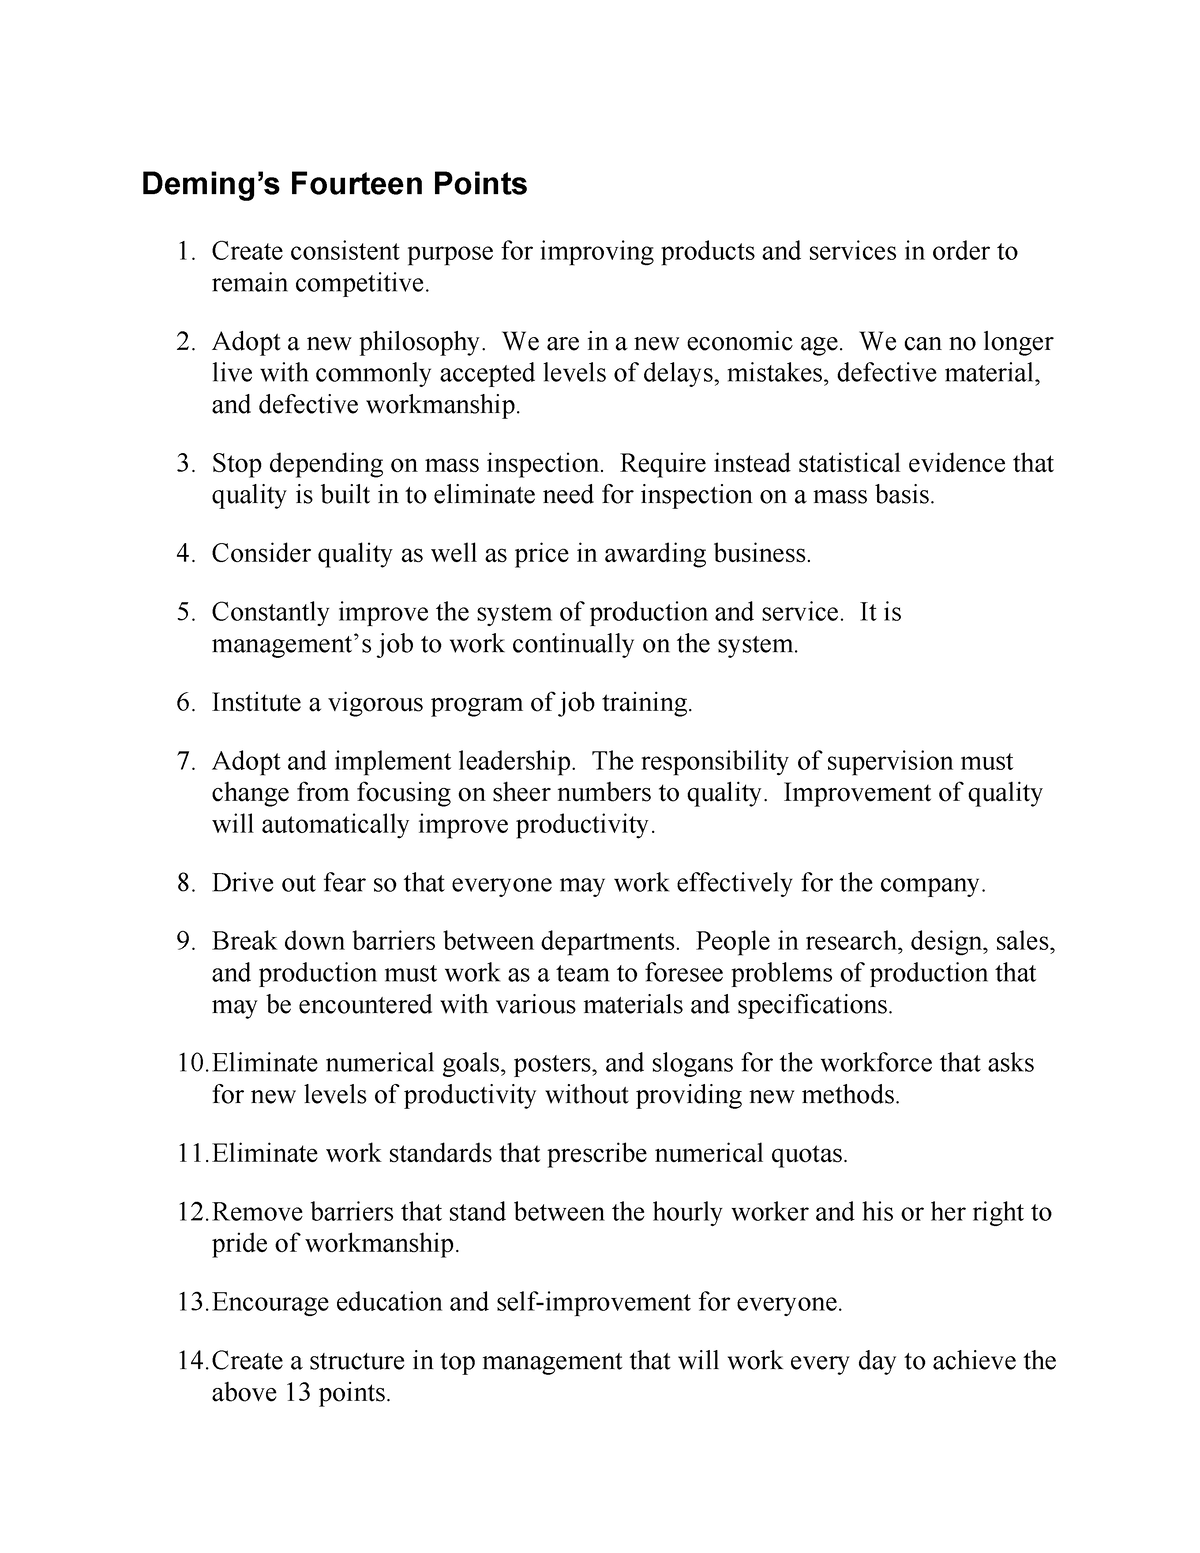 Deming - Deming’s Fourteen Points Create consistent purpose for ...